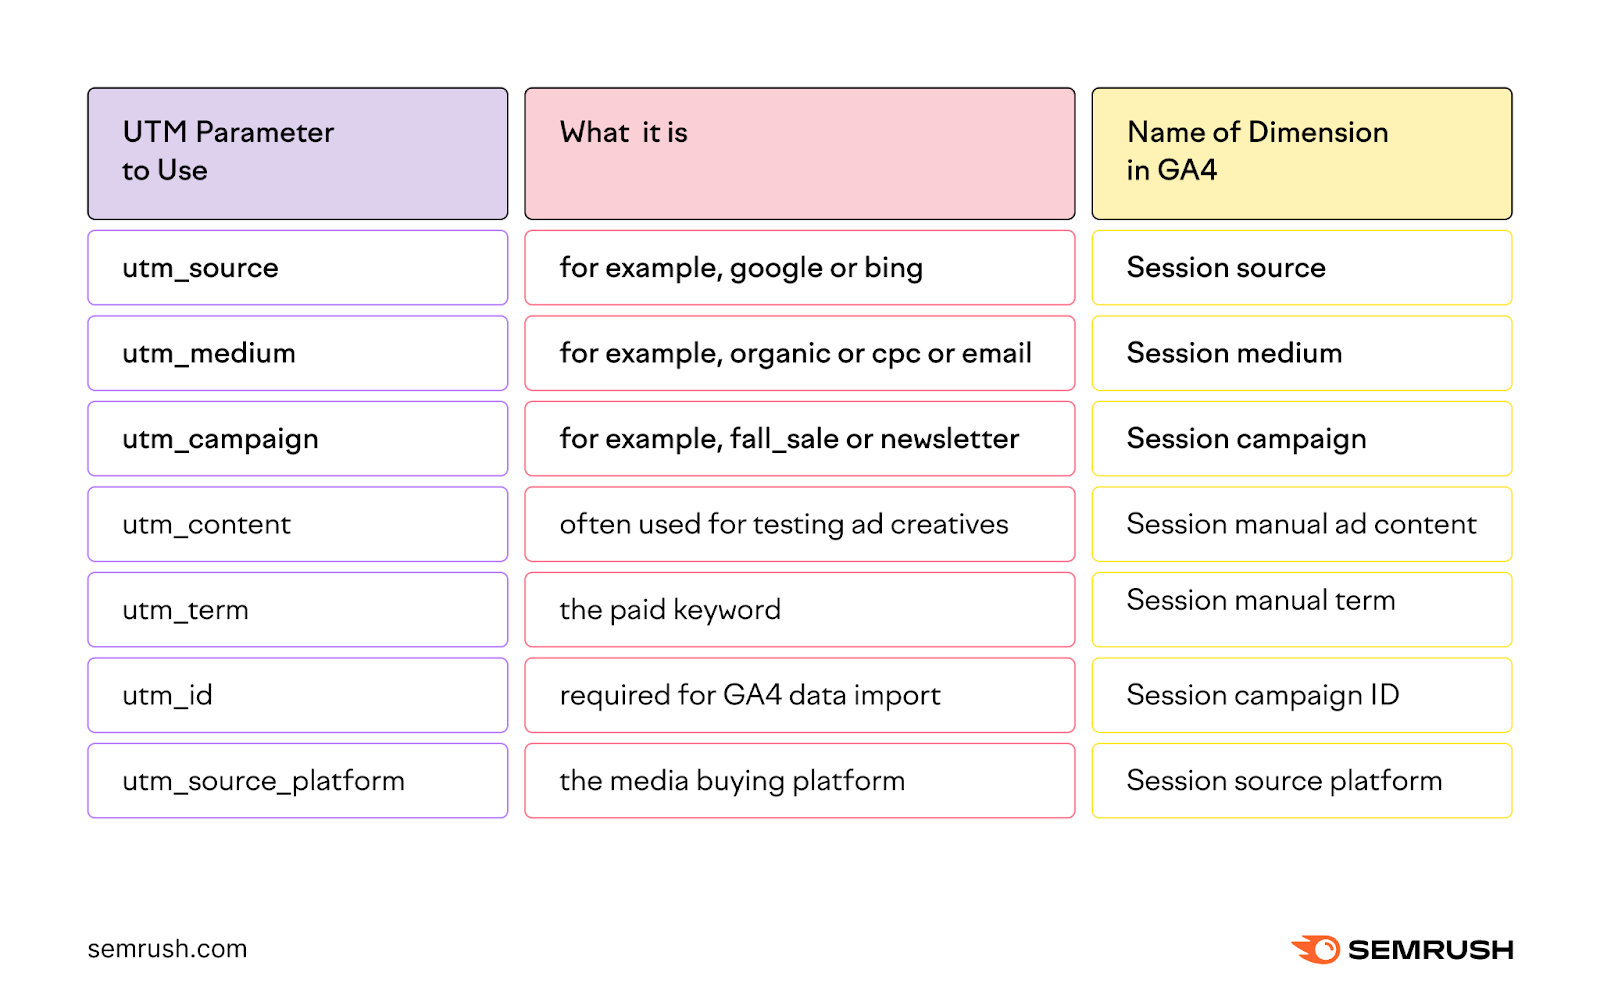 A table showing UTM parameters, what they are, and name of each dimension in GA4